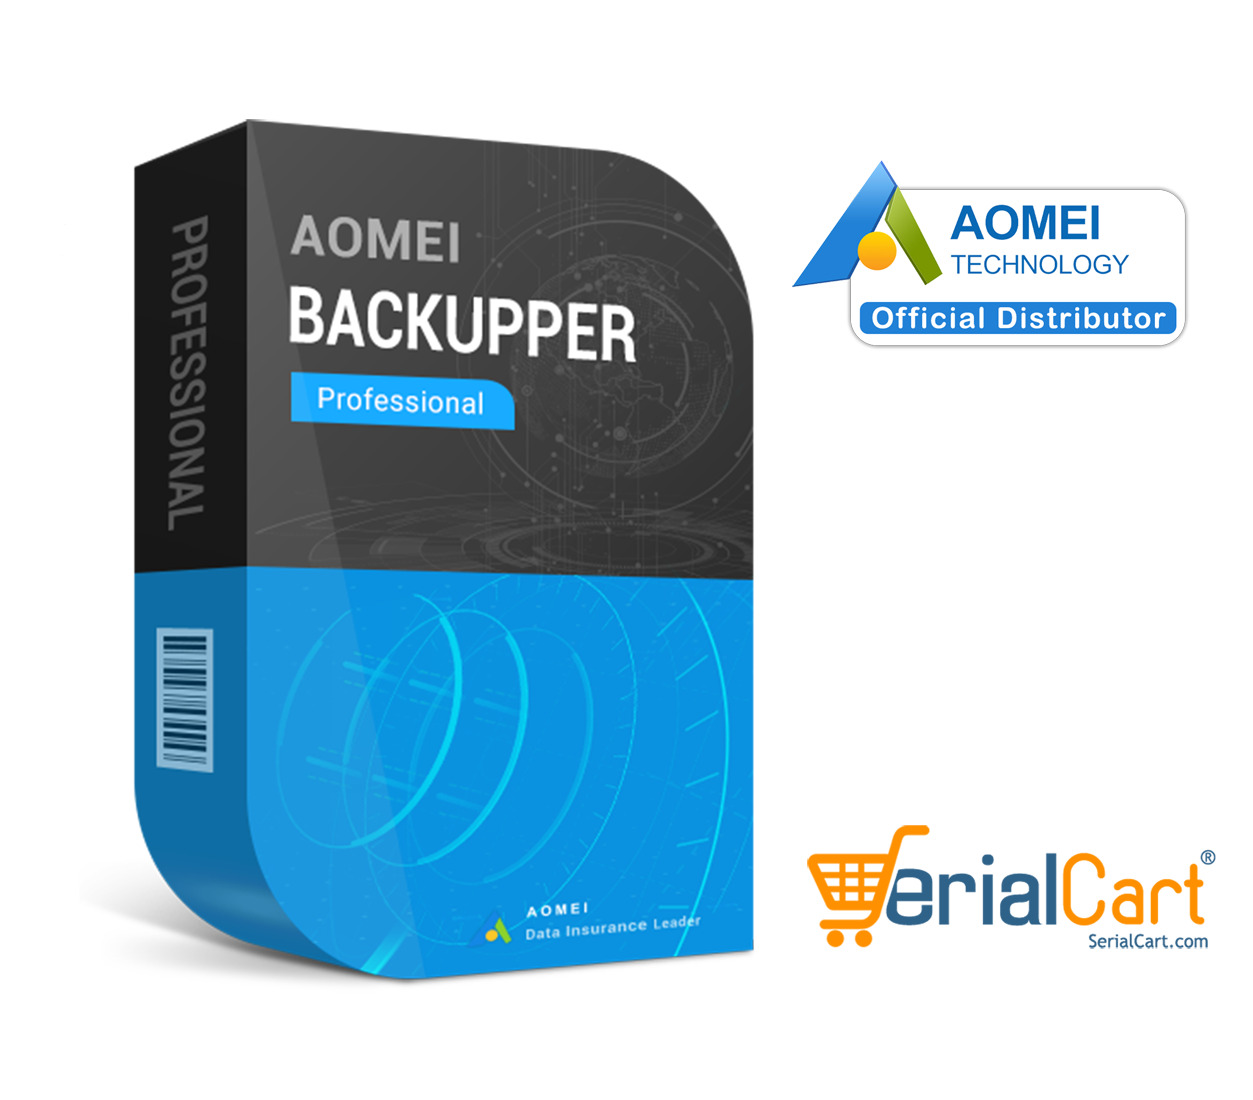 AOMEI Backupper Professional for 1 PC - Lifetime Updates